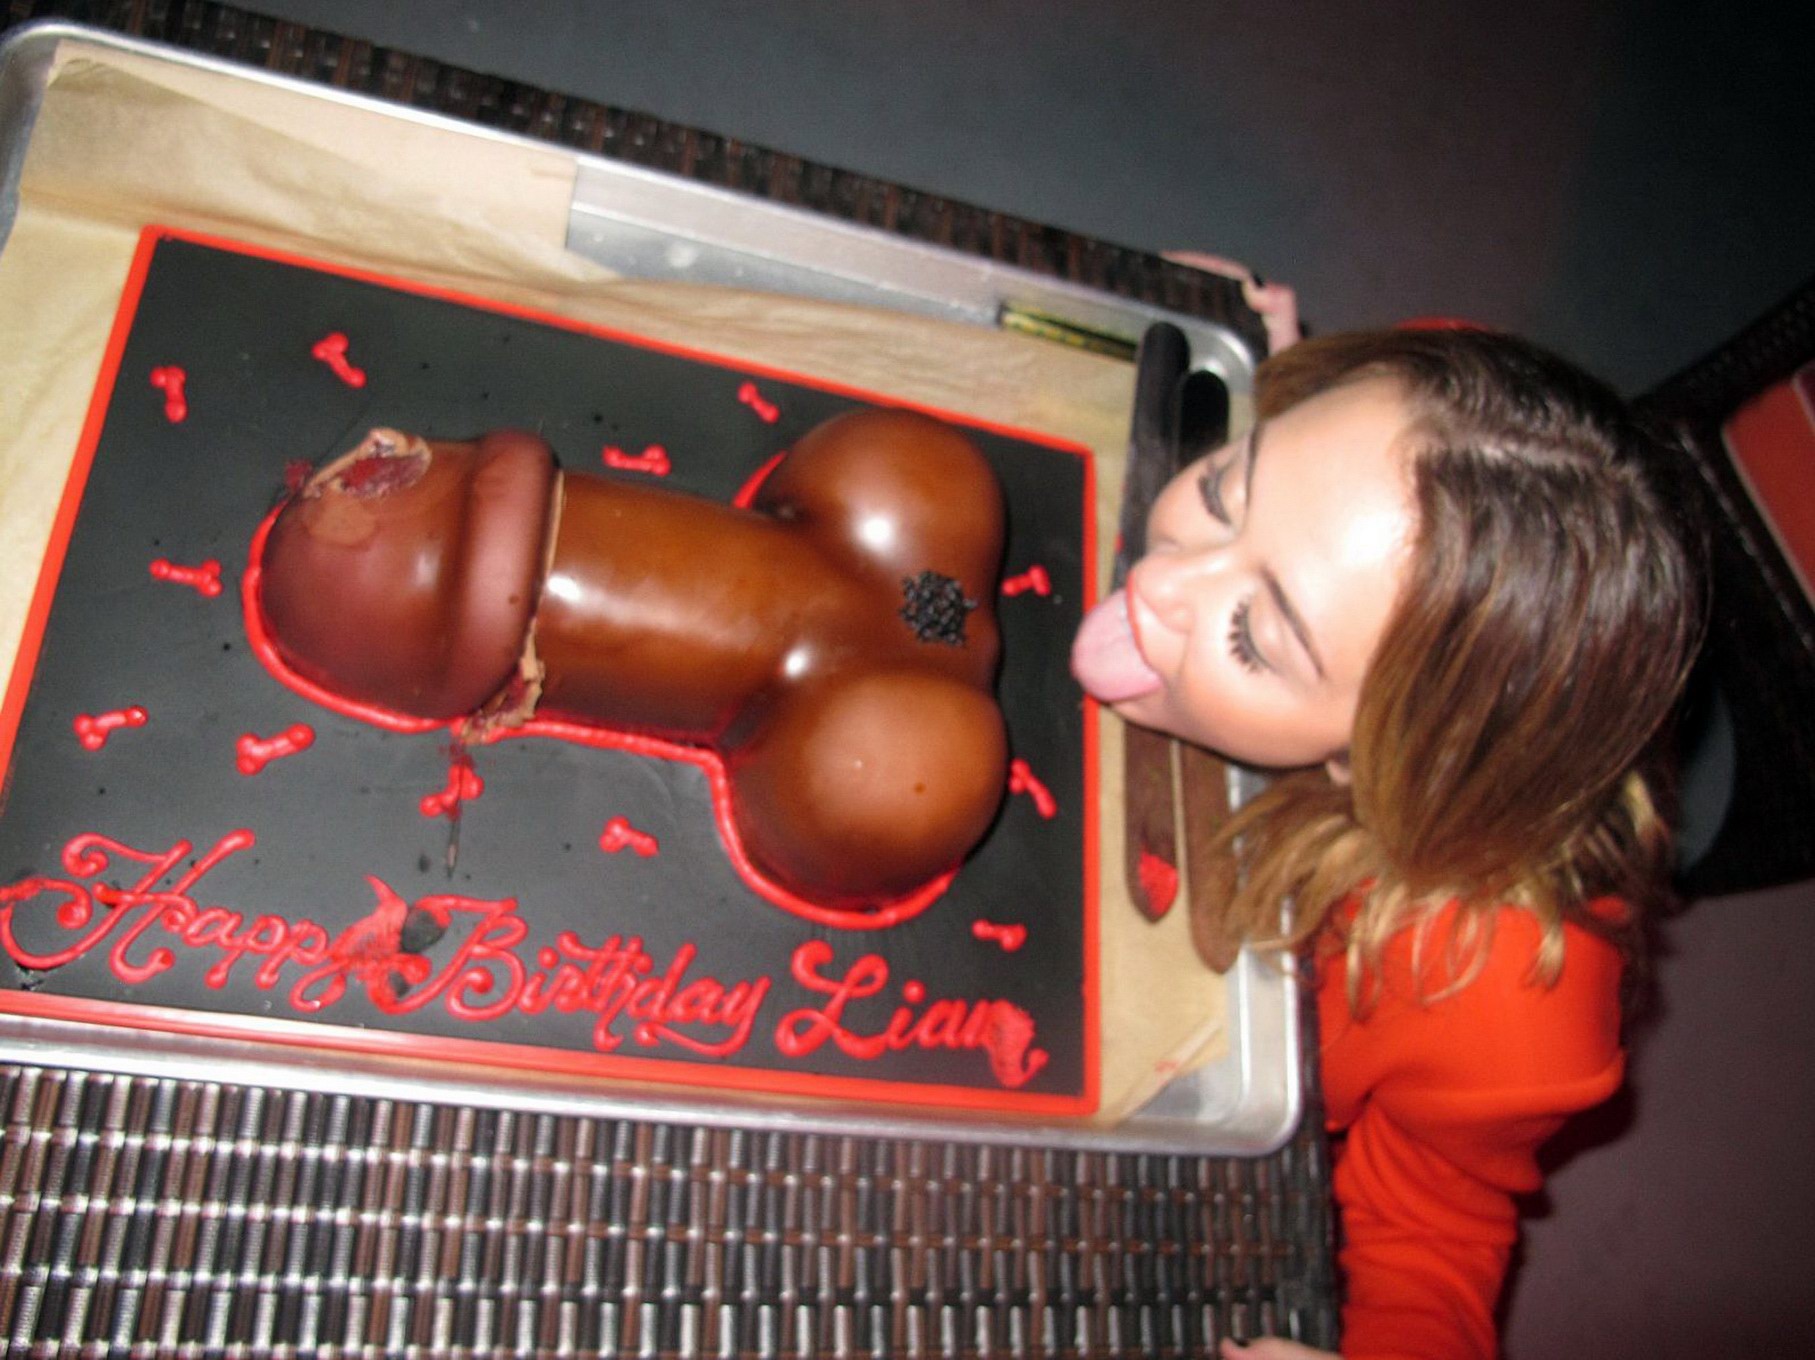 Miley Cyrus licking a huge cock-shaped cake at her birthday party in LA #75275174